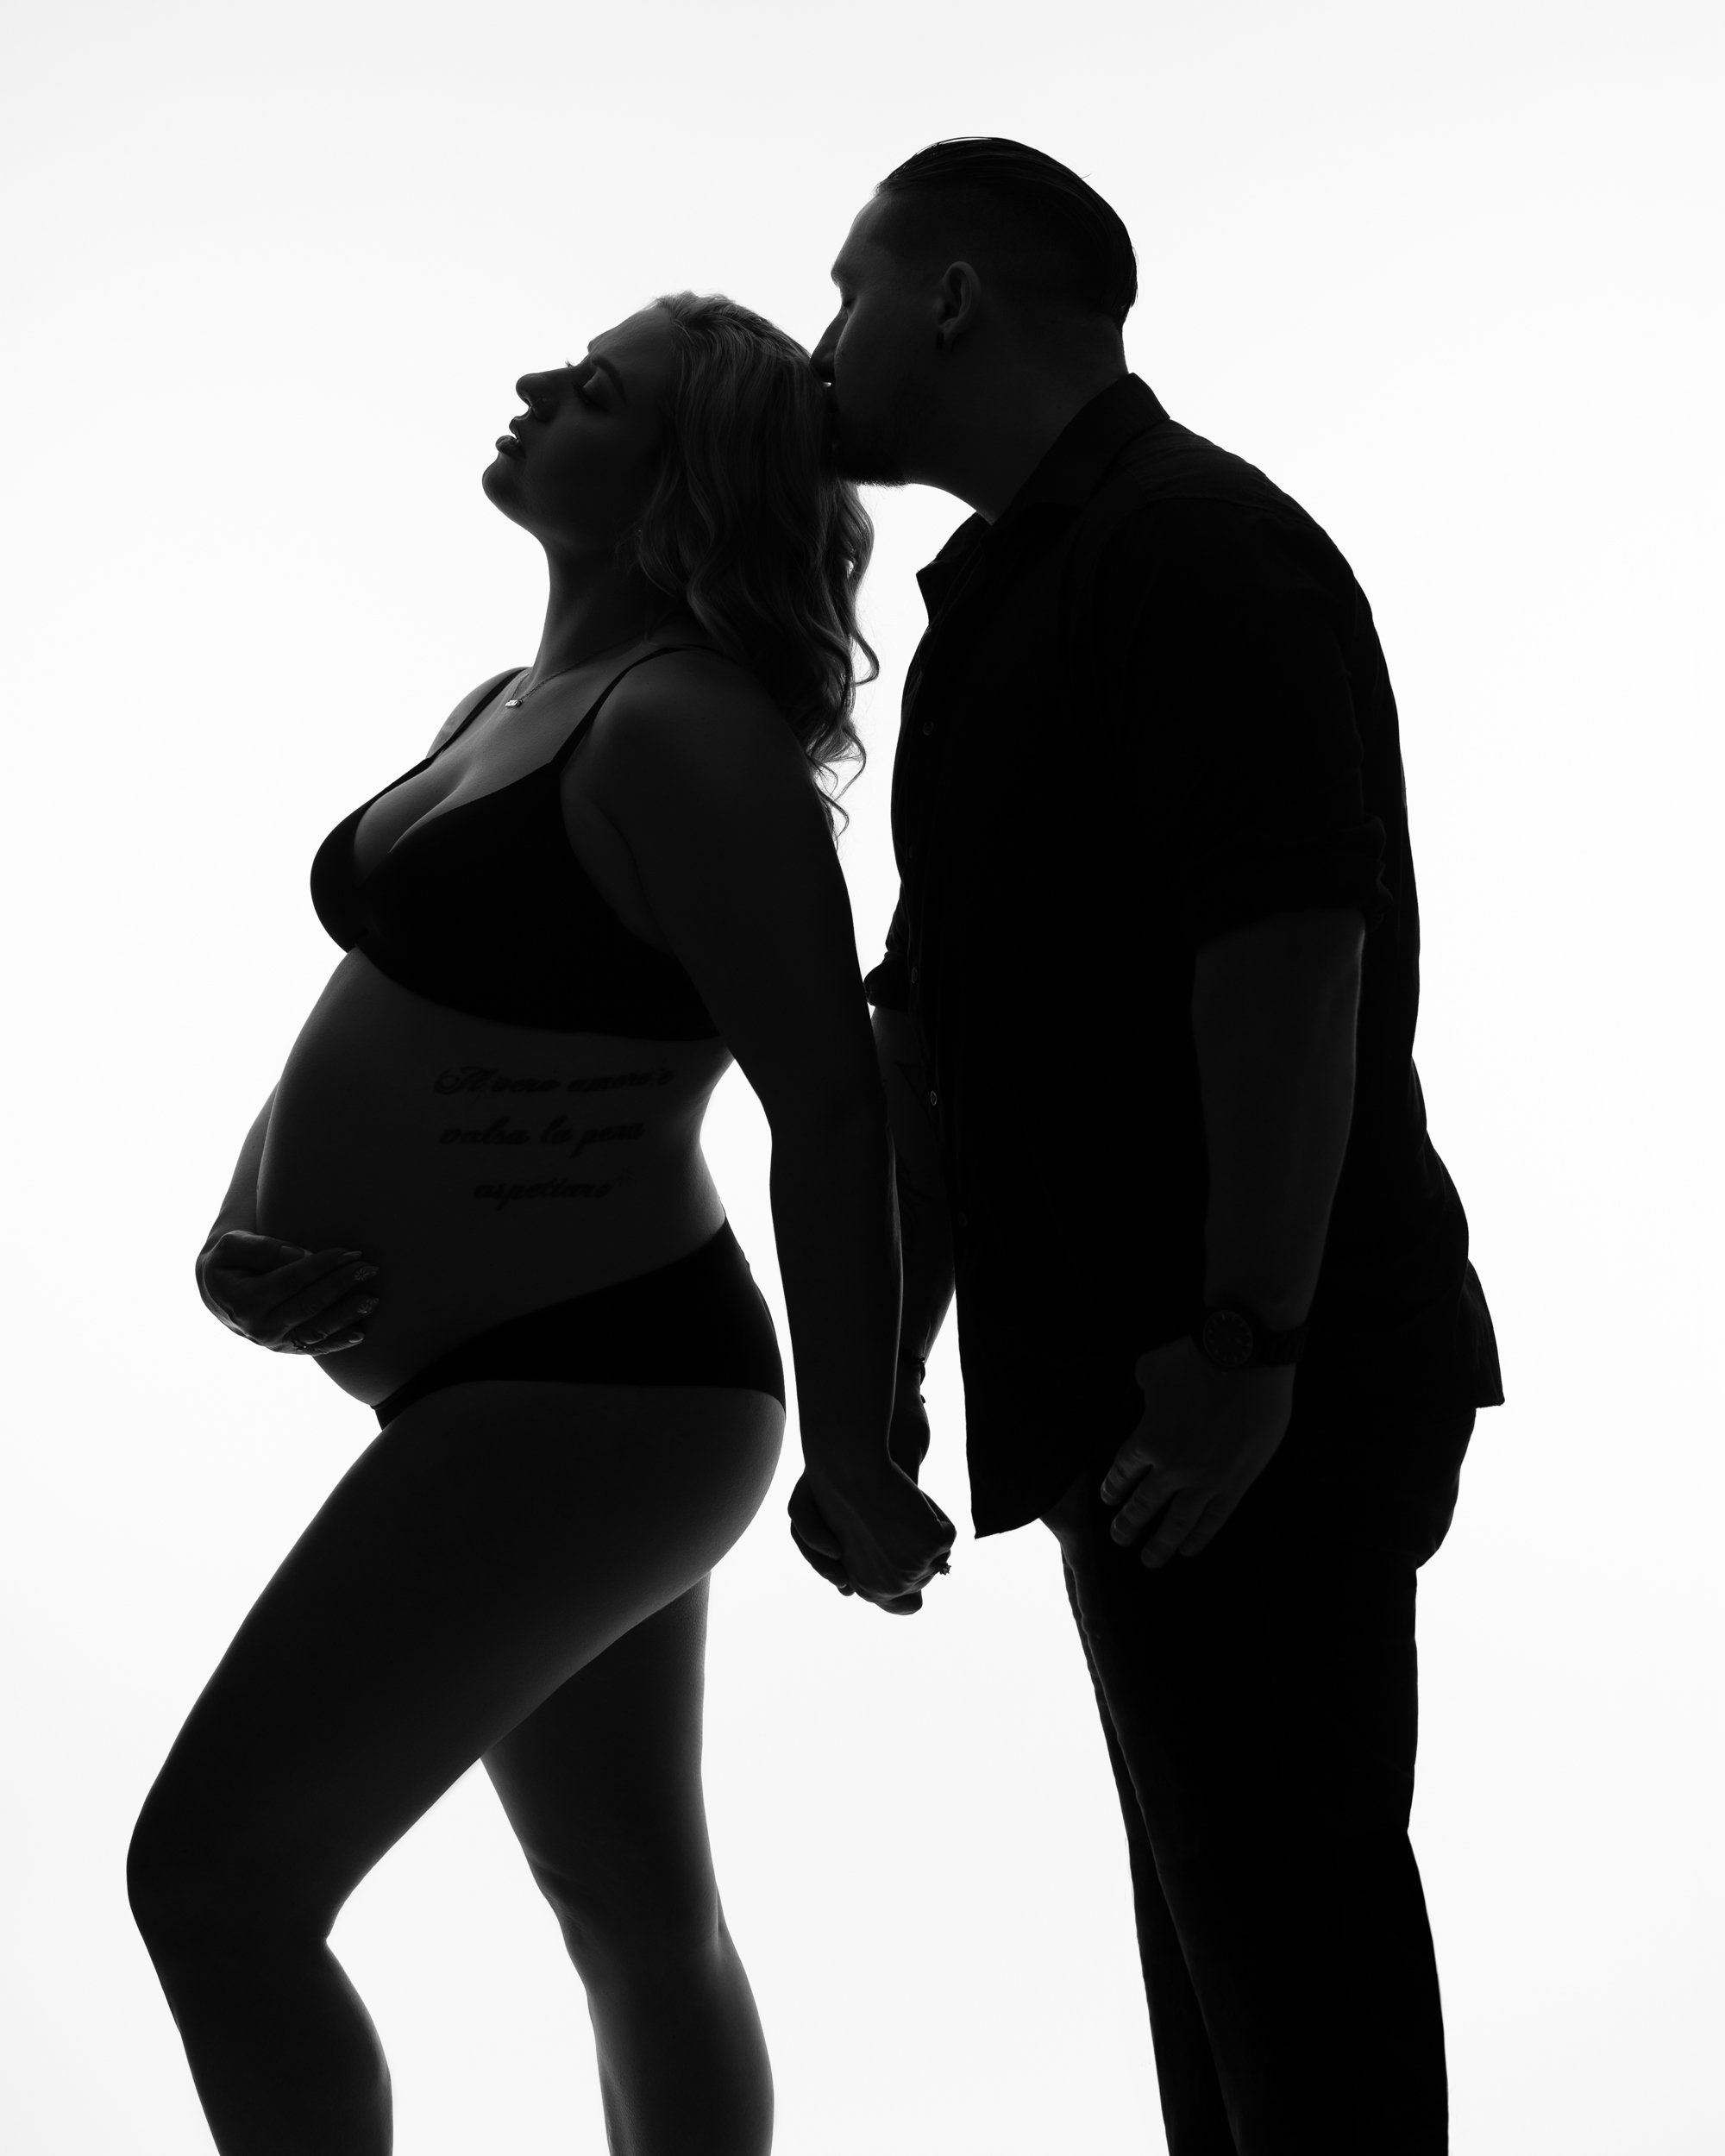 wife-and-husband-embracing-baby-bump-together-in-black-and-white-silhouette-with-kiss.jpg